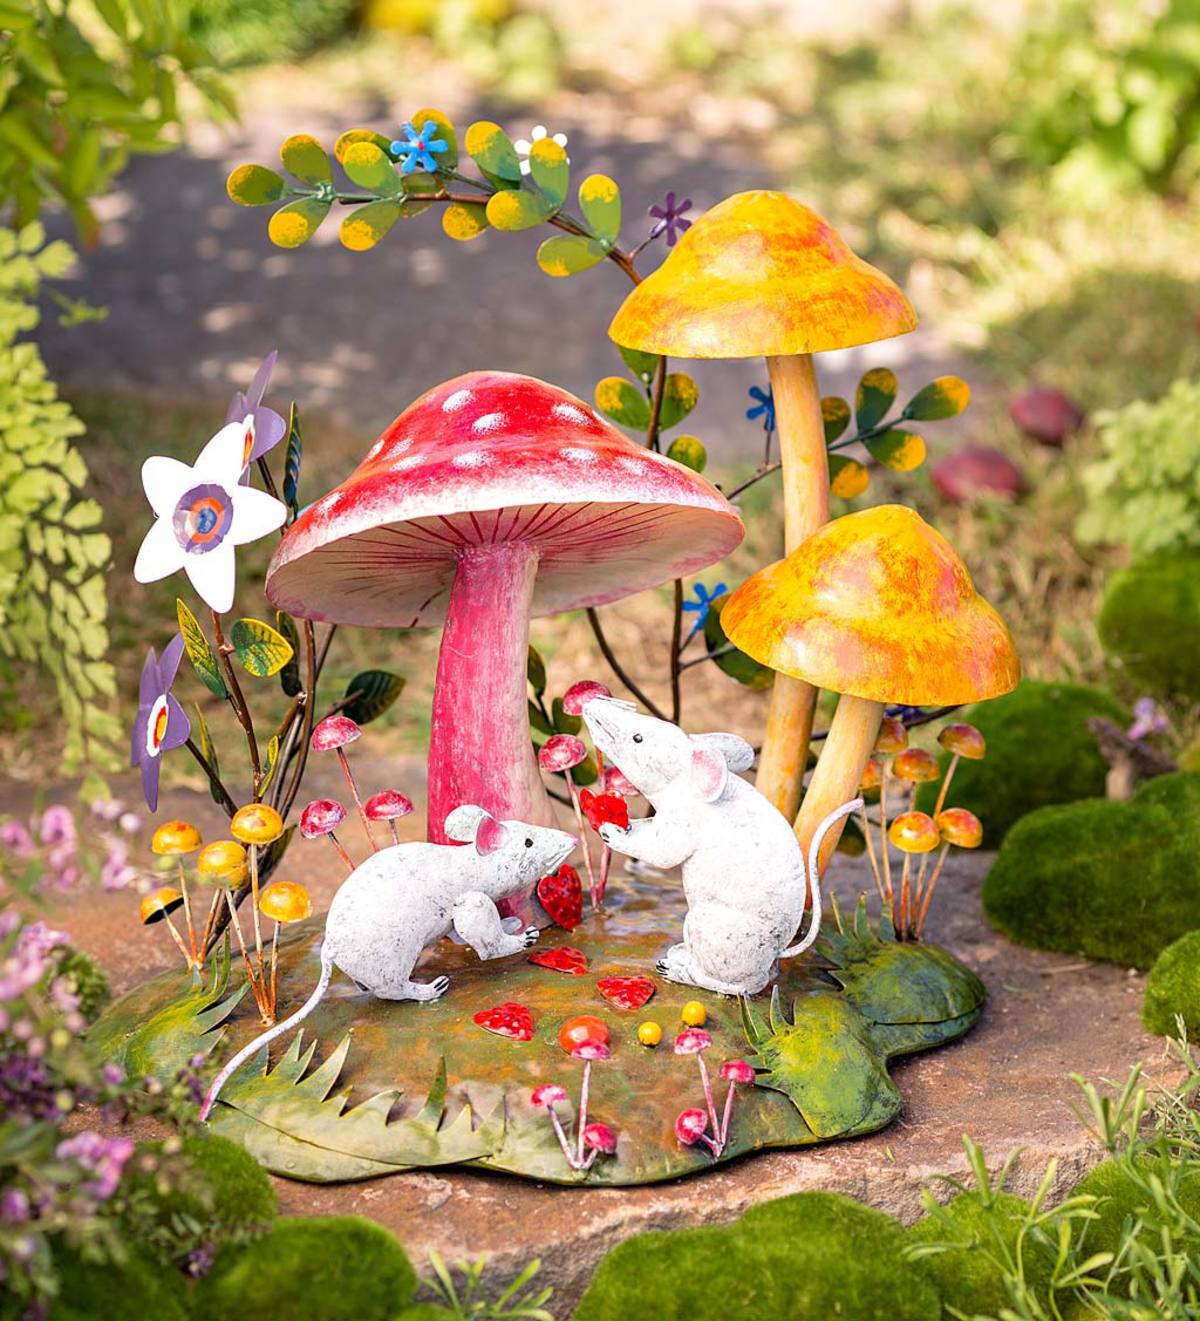 Handcrafted Colorful Metal Mice and Mushrooms Diorama